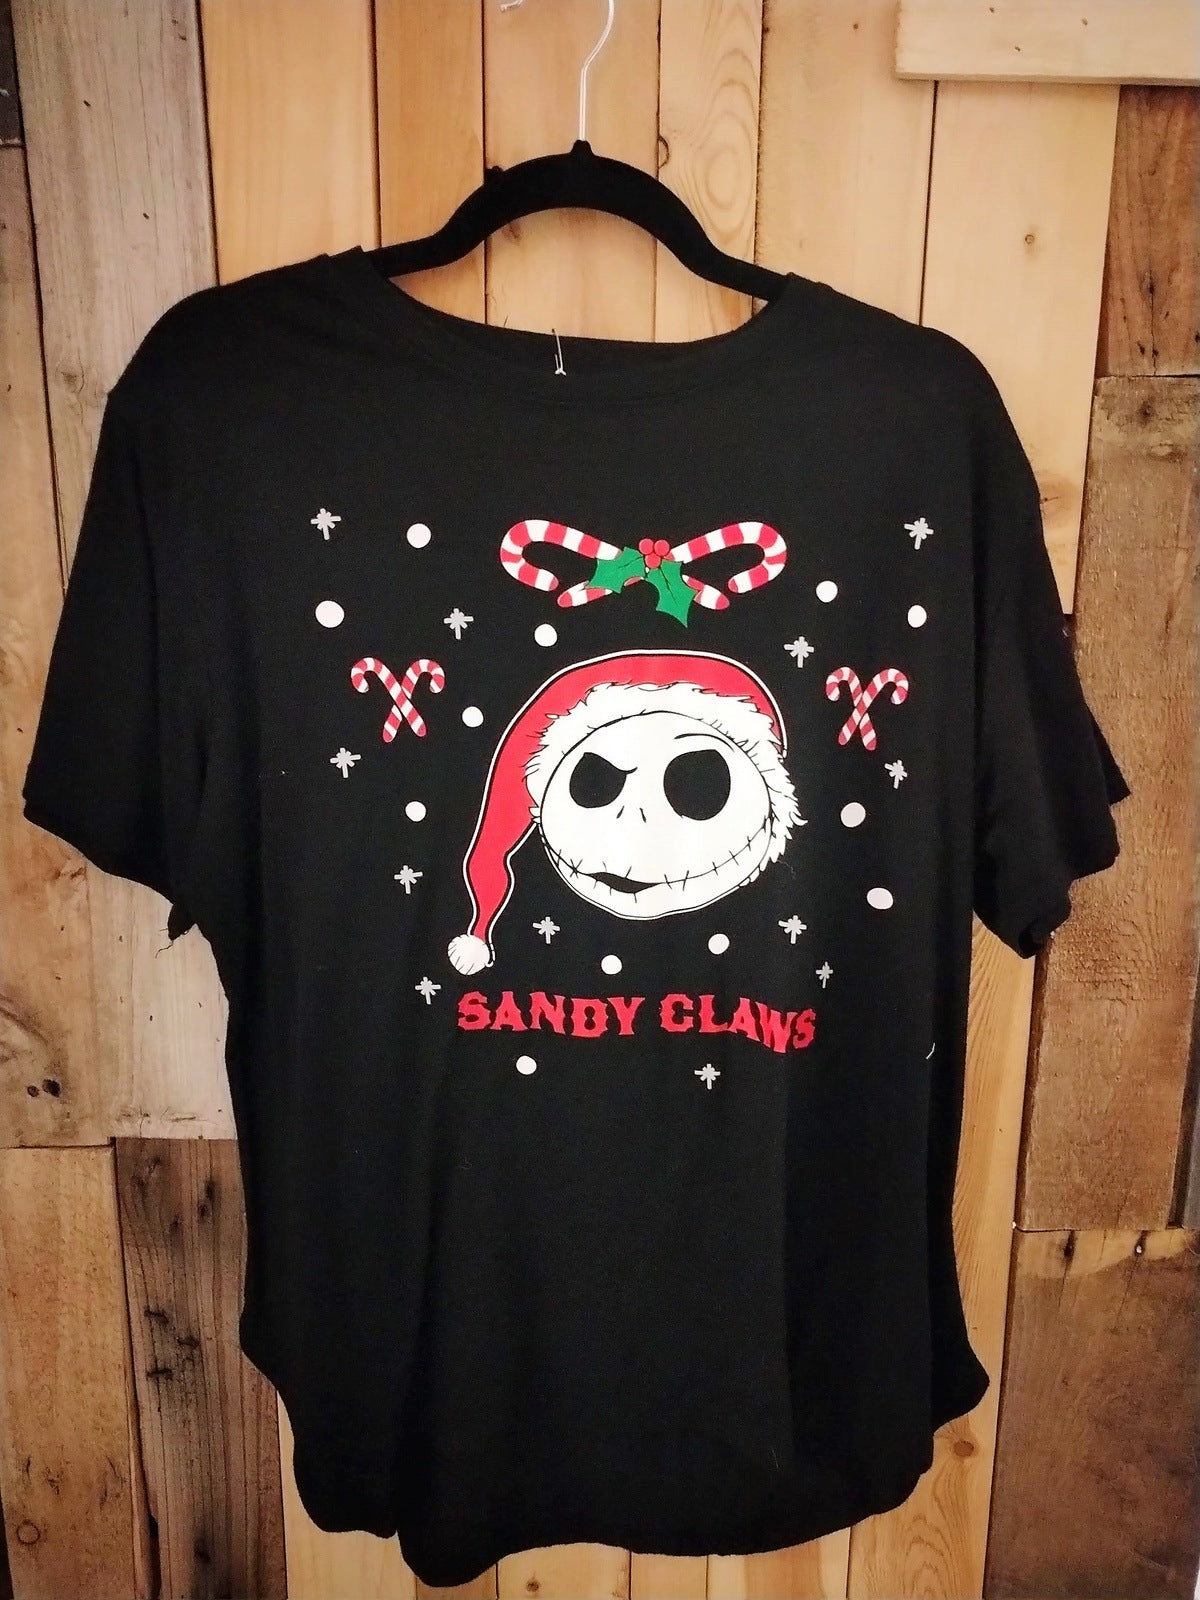 Nightmare Before Christmas Official Merchandise Women's T Shirt Size 3X